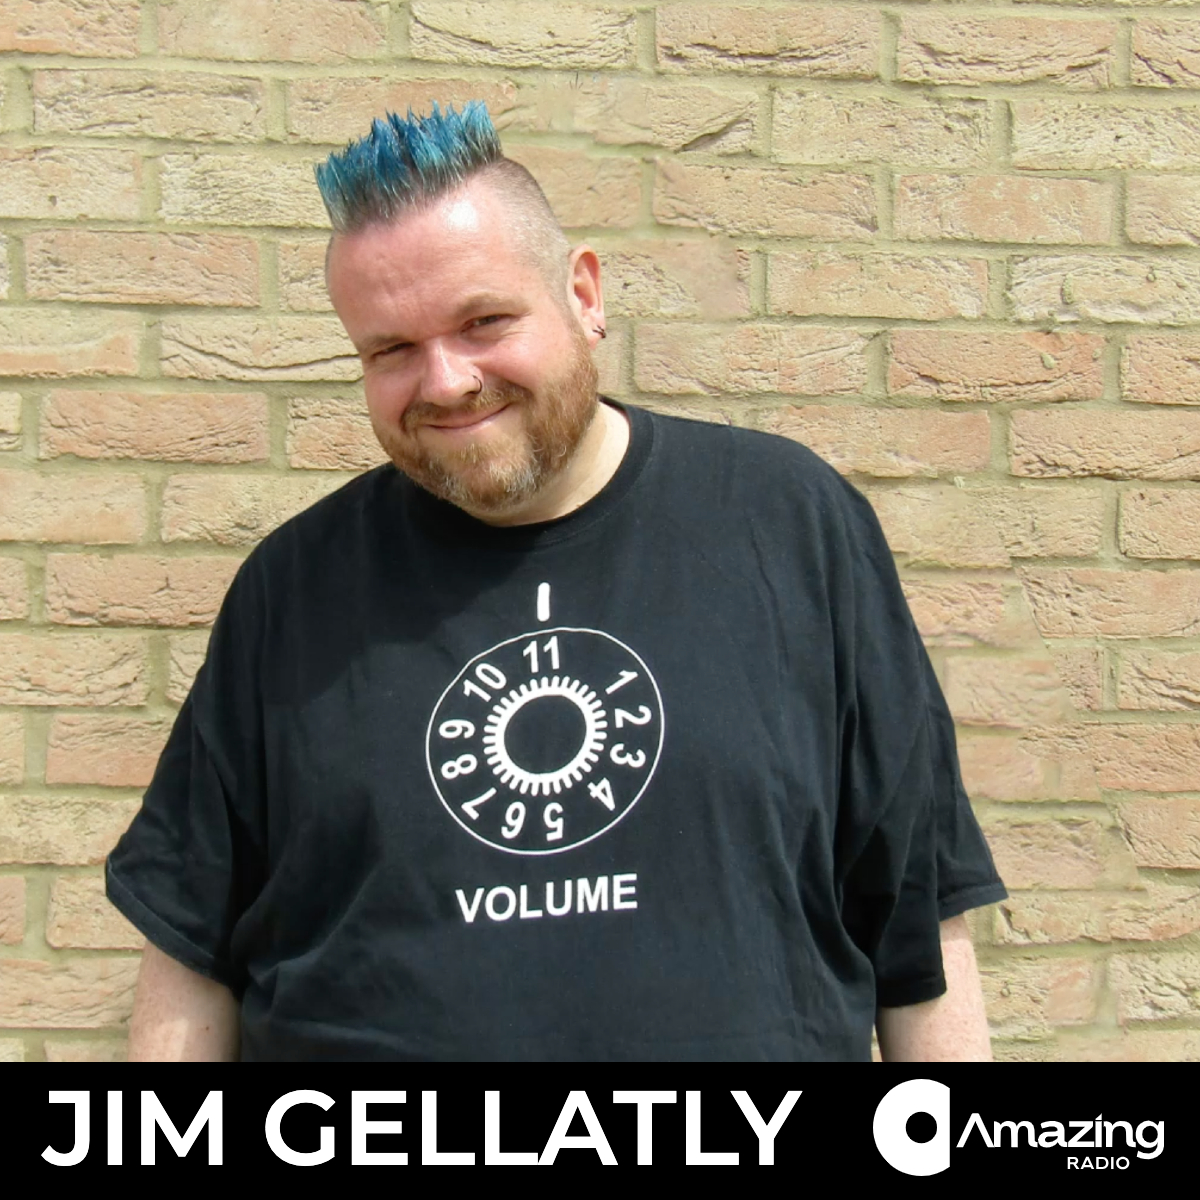 We've got @JimGellatly on @amazingradio, bringing you all the best new and emerging music! This week, Jim is playing @alxromanc @thisisaylee @iambecharlotte @Benwalkertv @bottlerockets_ @braw_official @DTTVOfficial @DivingHorseBand @French4Some @hanajanemusic and more!